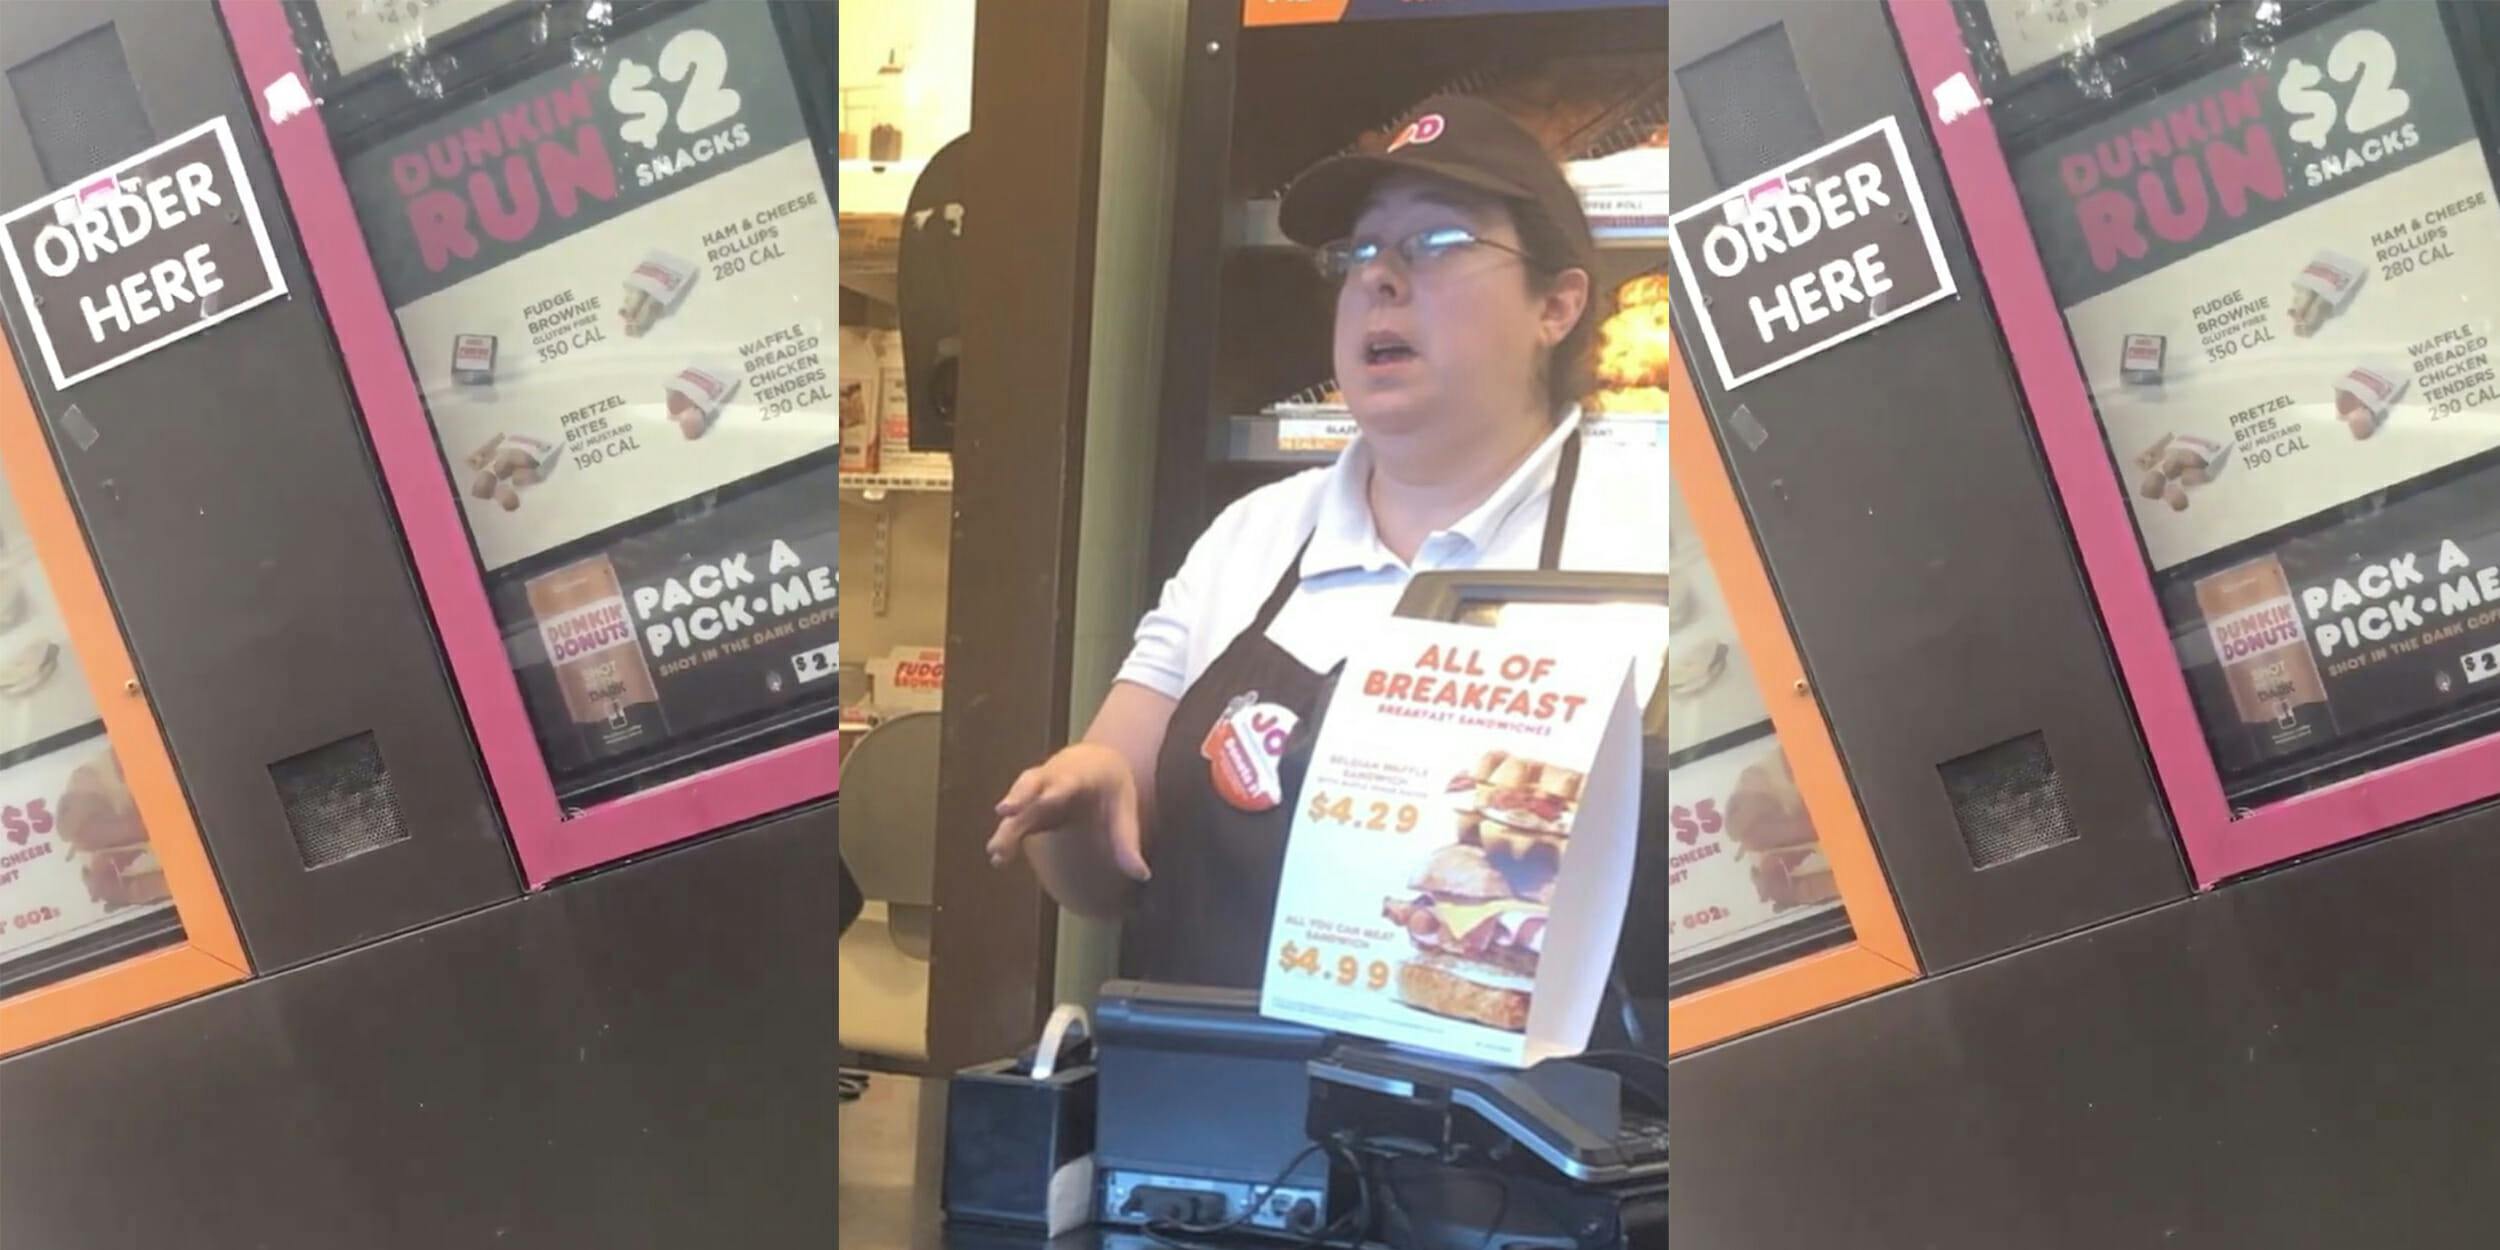 A Dunkin' reportedly called police on a woman during an argument about her speaking Somali.